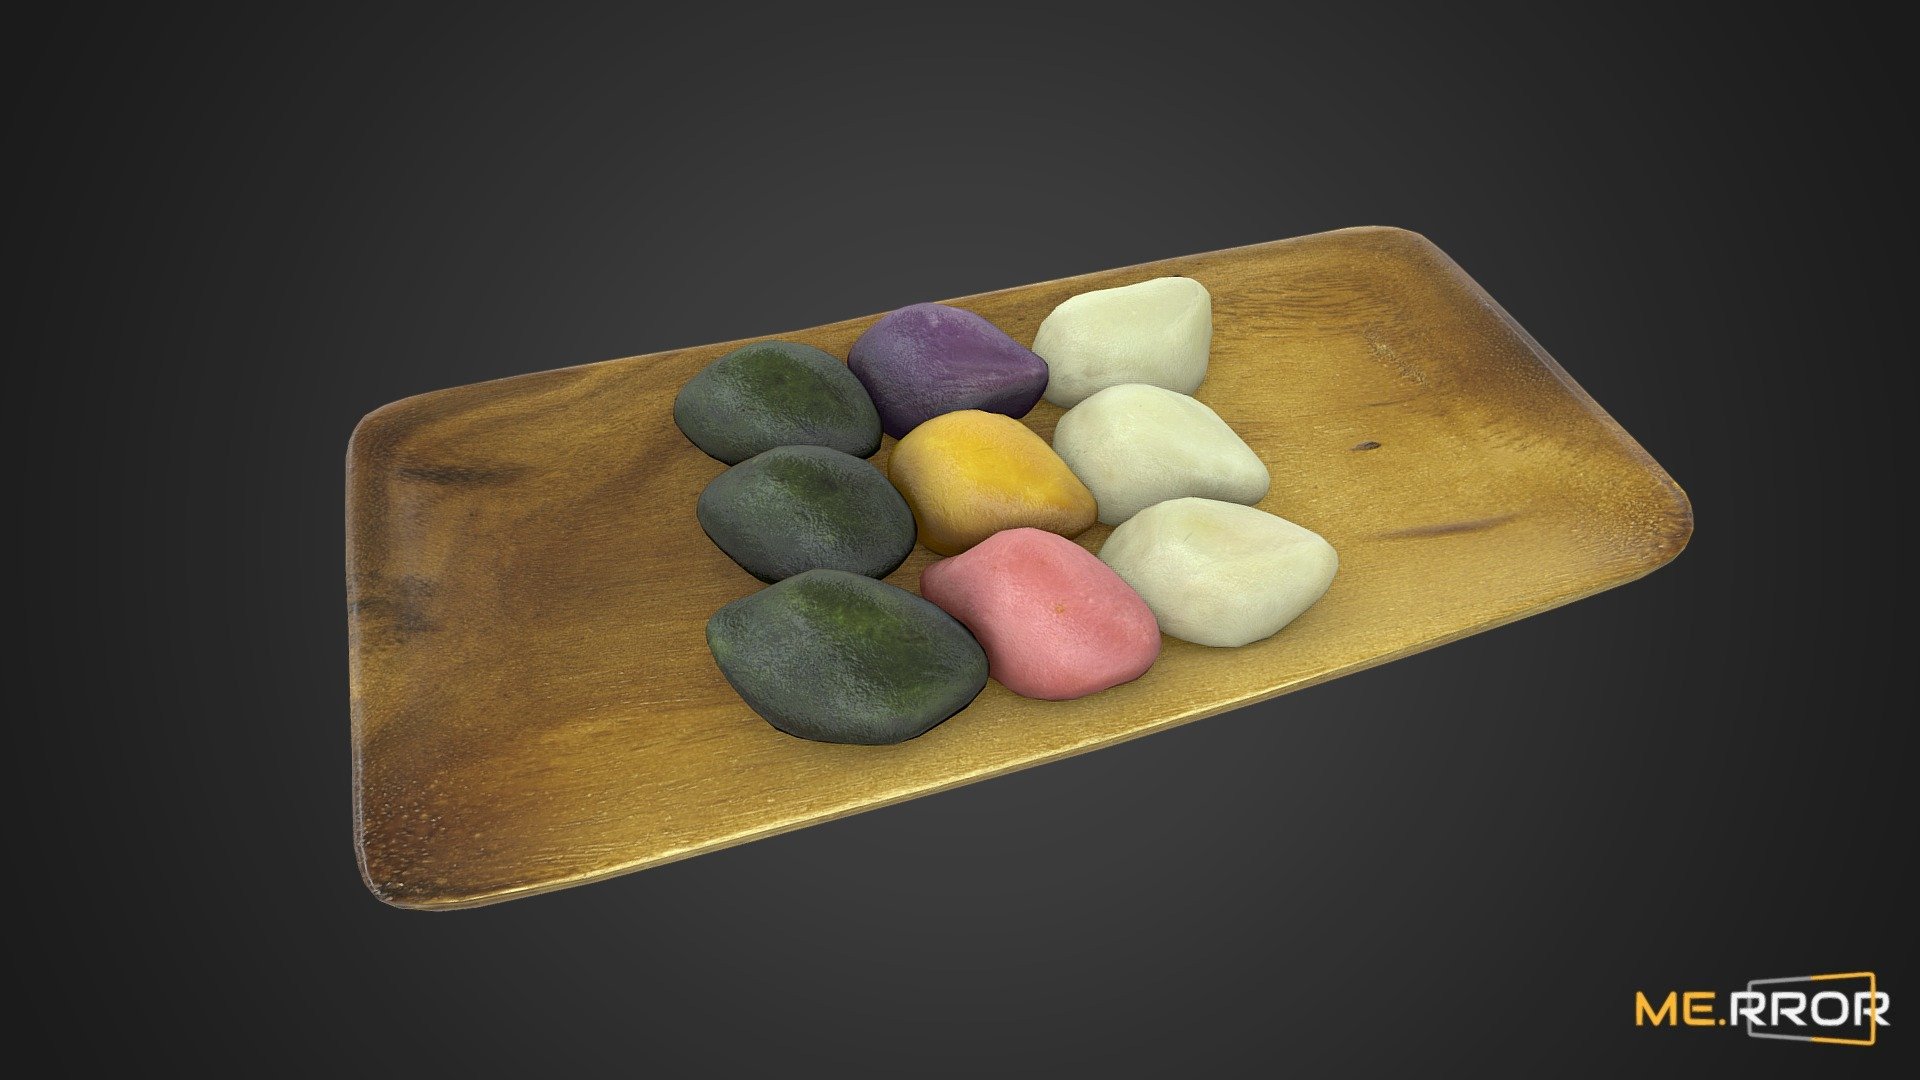 MERROR is a 3D Content PLATFORM which introduces various Asian assets to the 3D world

#3DScanning #Photogrametry #ME.RROR - [Game-Ready] Korean Rice Cake Songpyeon 3 - Buy Royalty Free 3D model by ME.RROR Studio (@merror) 3d model